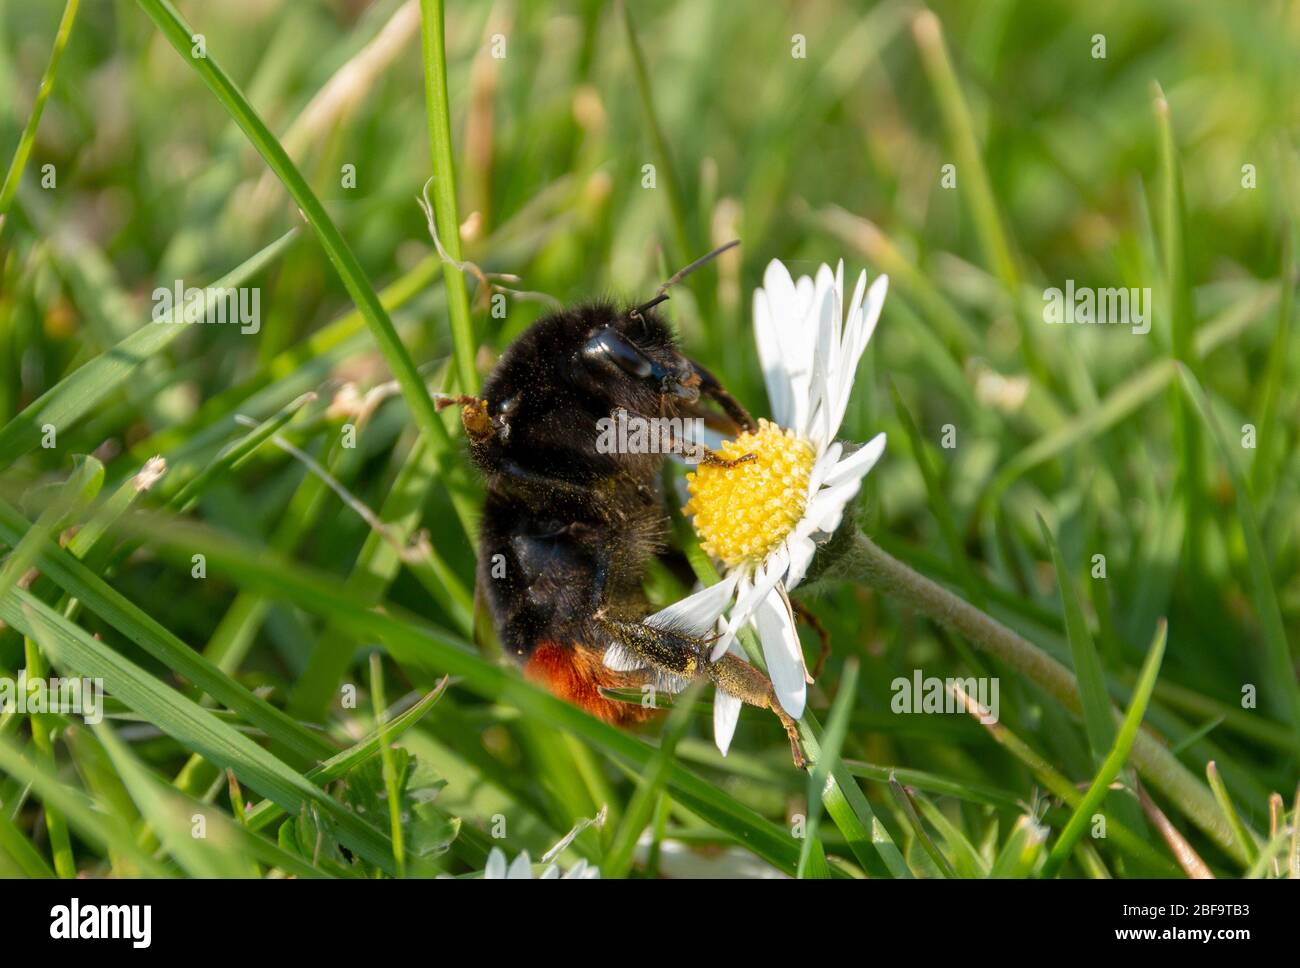 a close up view of a bumble bee collecting pollen off small daisy flowers in a open public park Stock Photo